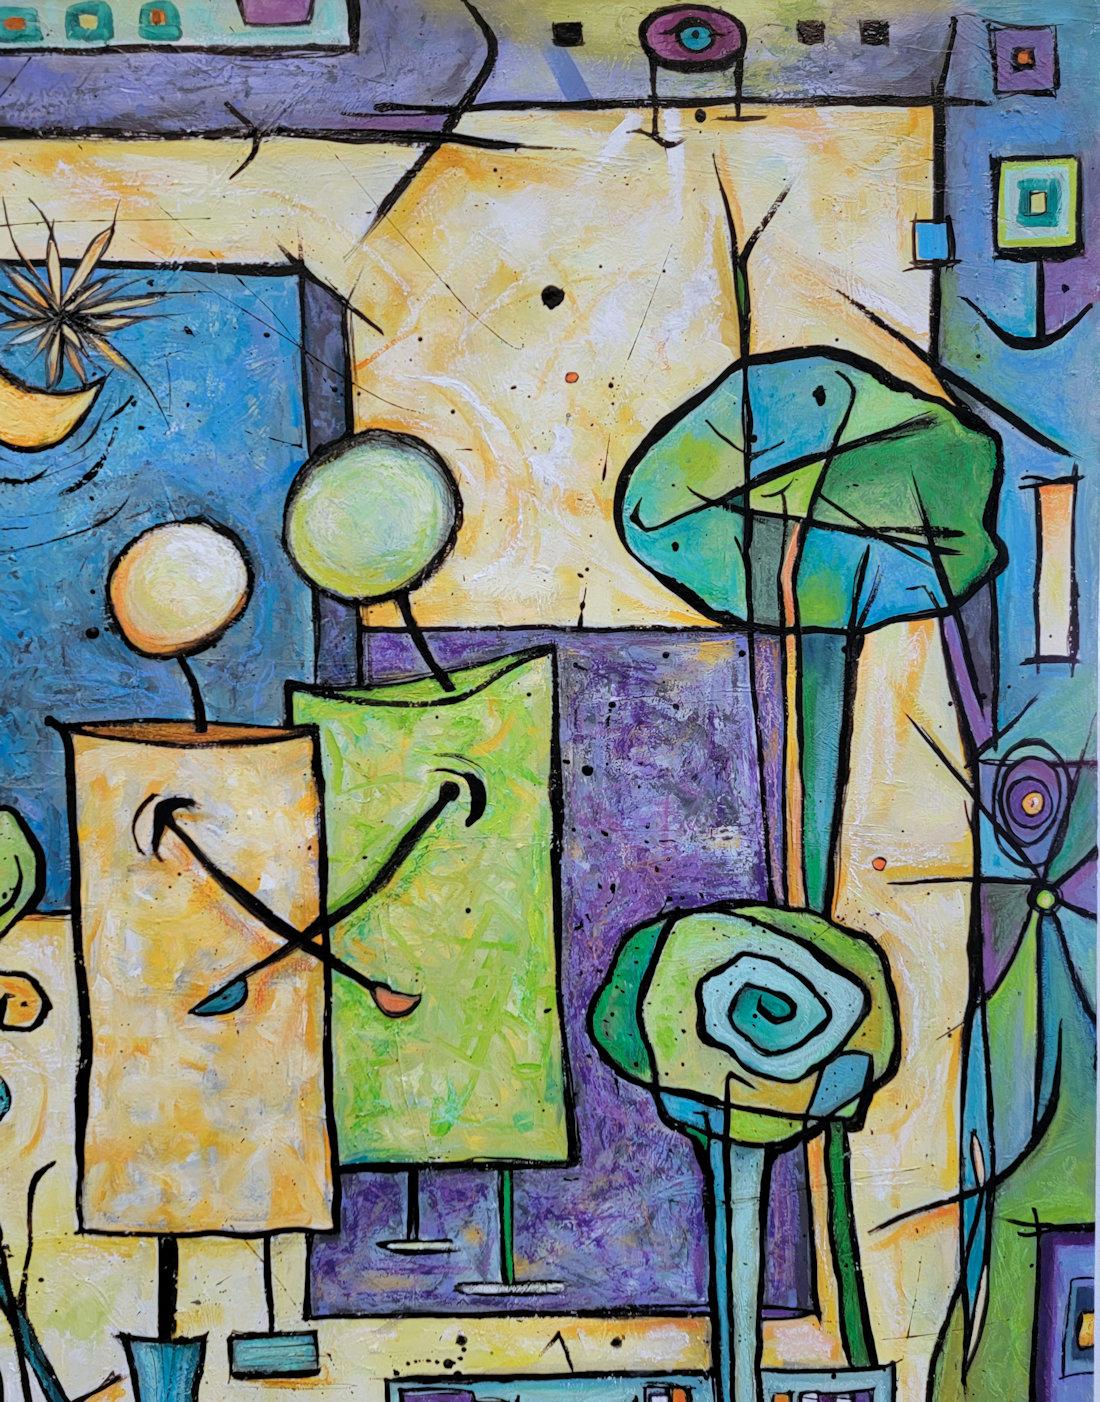 “Compadres” is a 50 x 40 inch oil painting on canvas by Anita Loomis. A work from her “Couples” series, this vibrantly colored abstract composition in cool blue, green, violet palette with pops of warm orange, captures a moment with two dear souls